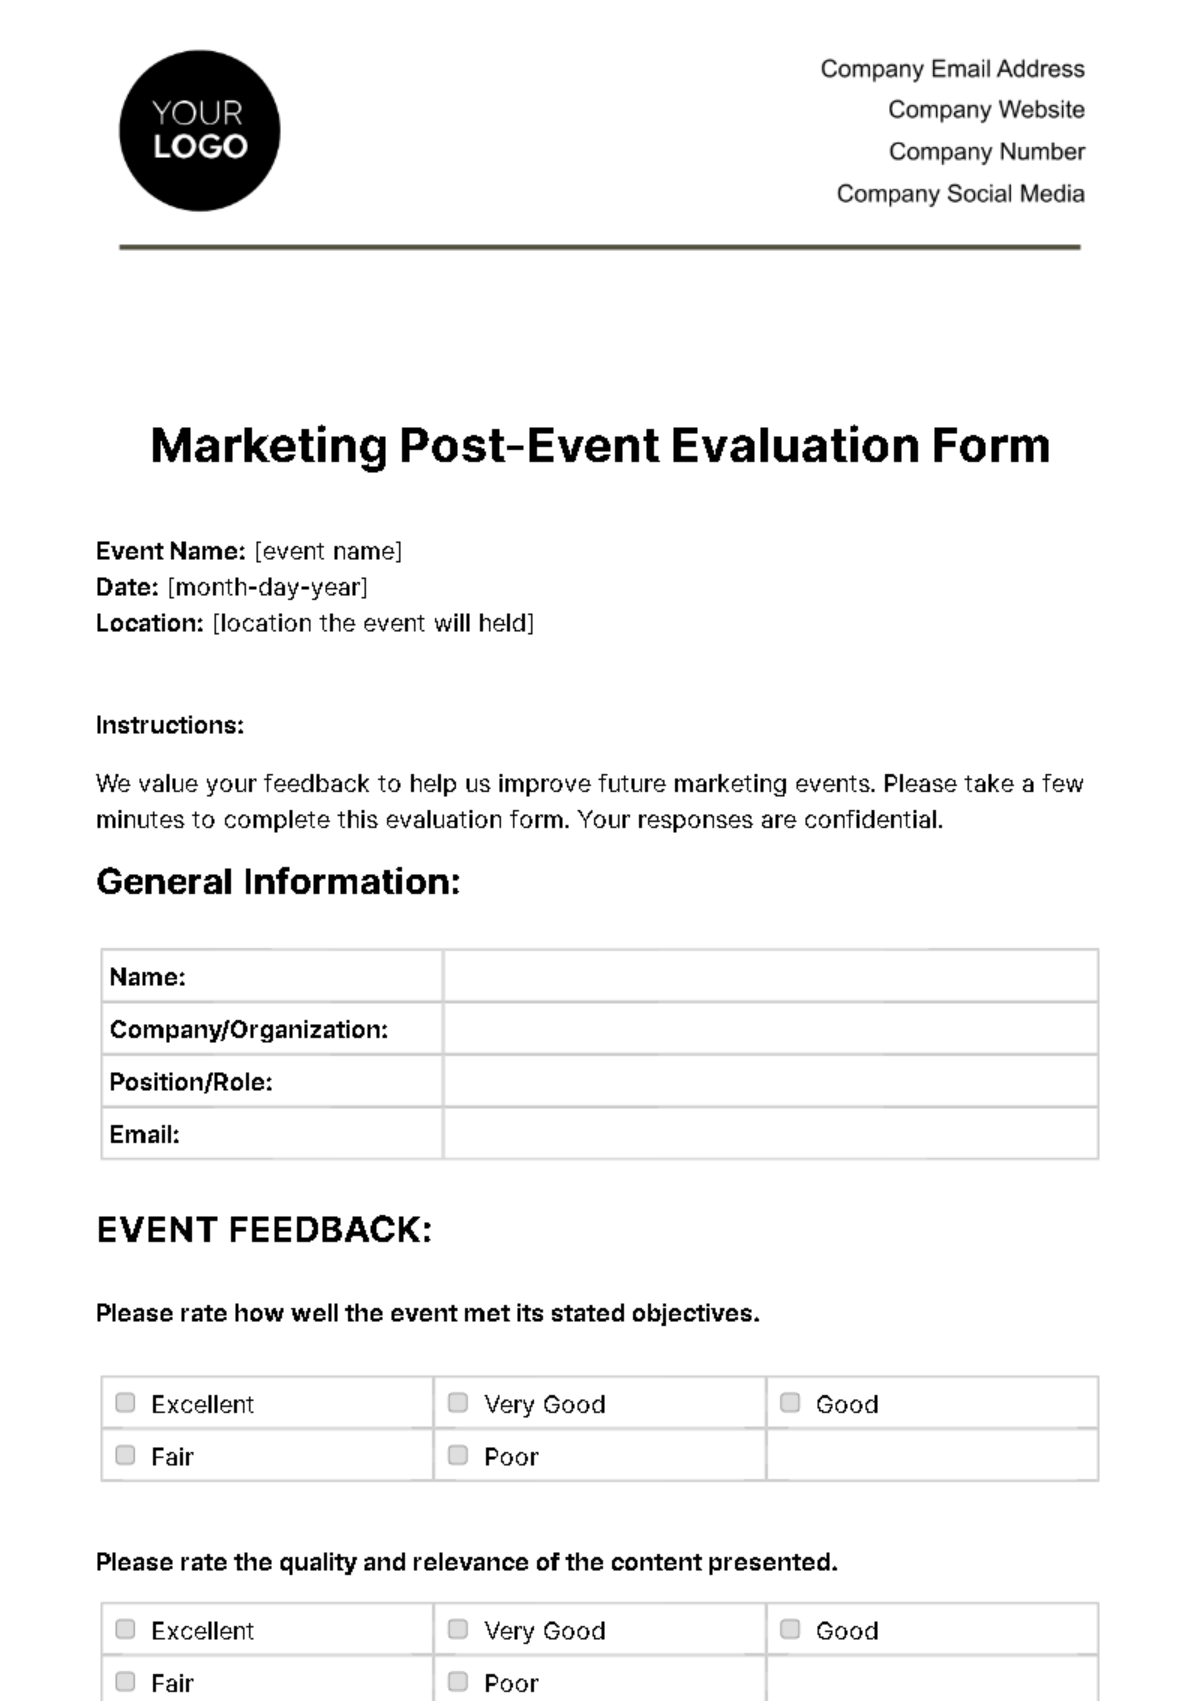 Free Marketing Post-Event Evaluation Form Template